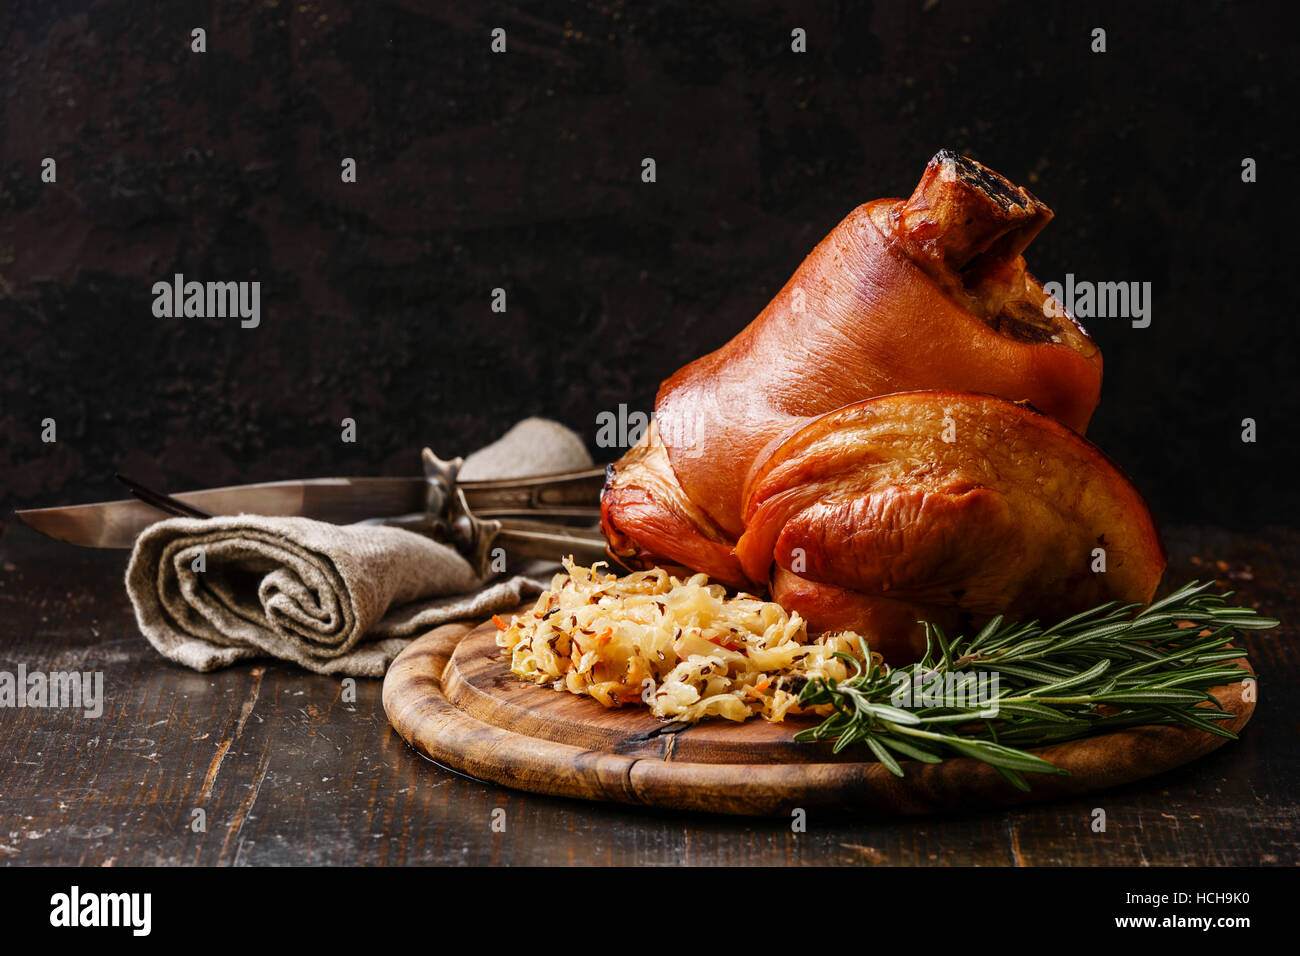 Roasted pork knuckle eisbein with braised boiled cabbage and rosemary on wooden cutting board Stock Photo